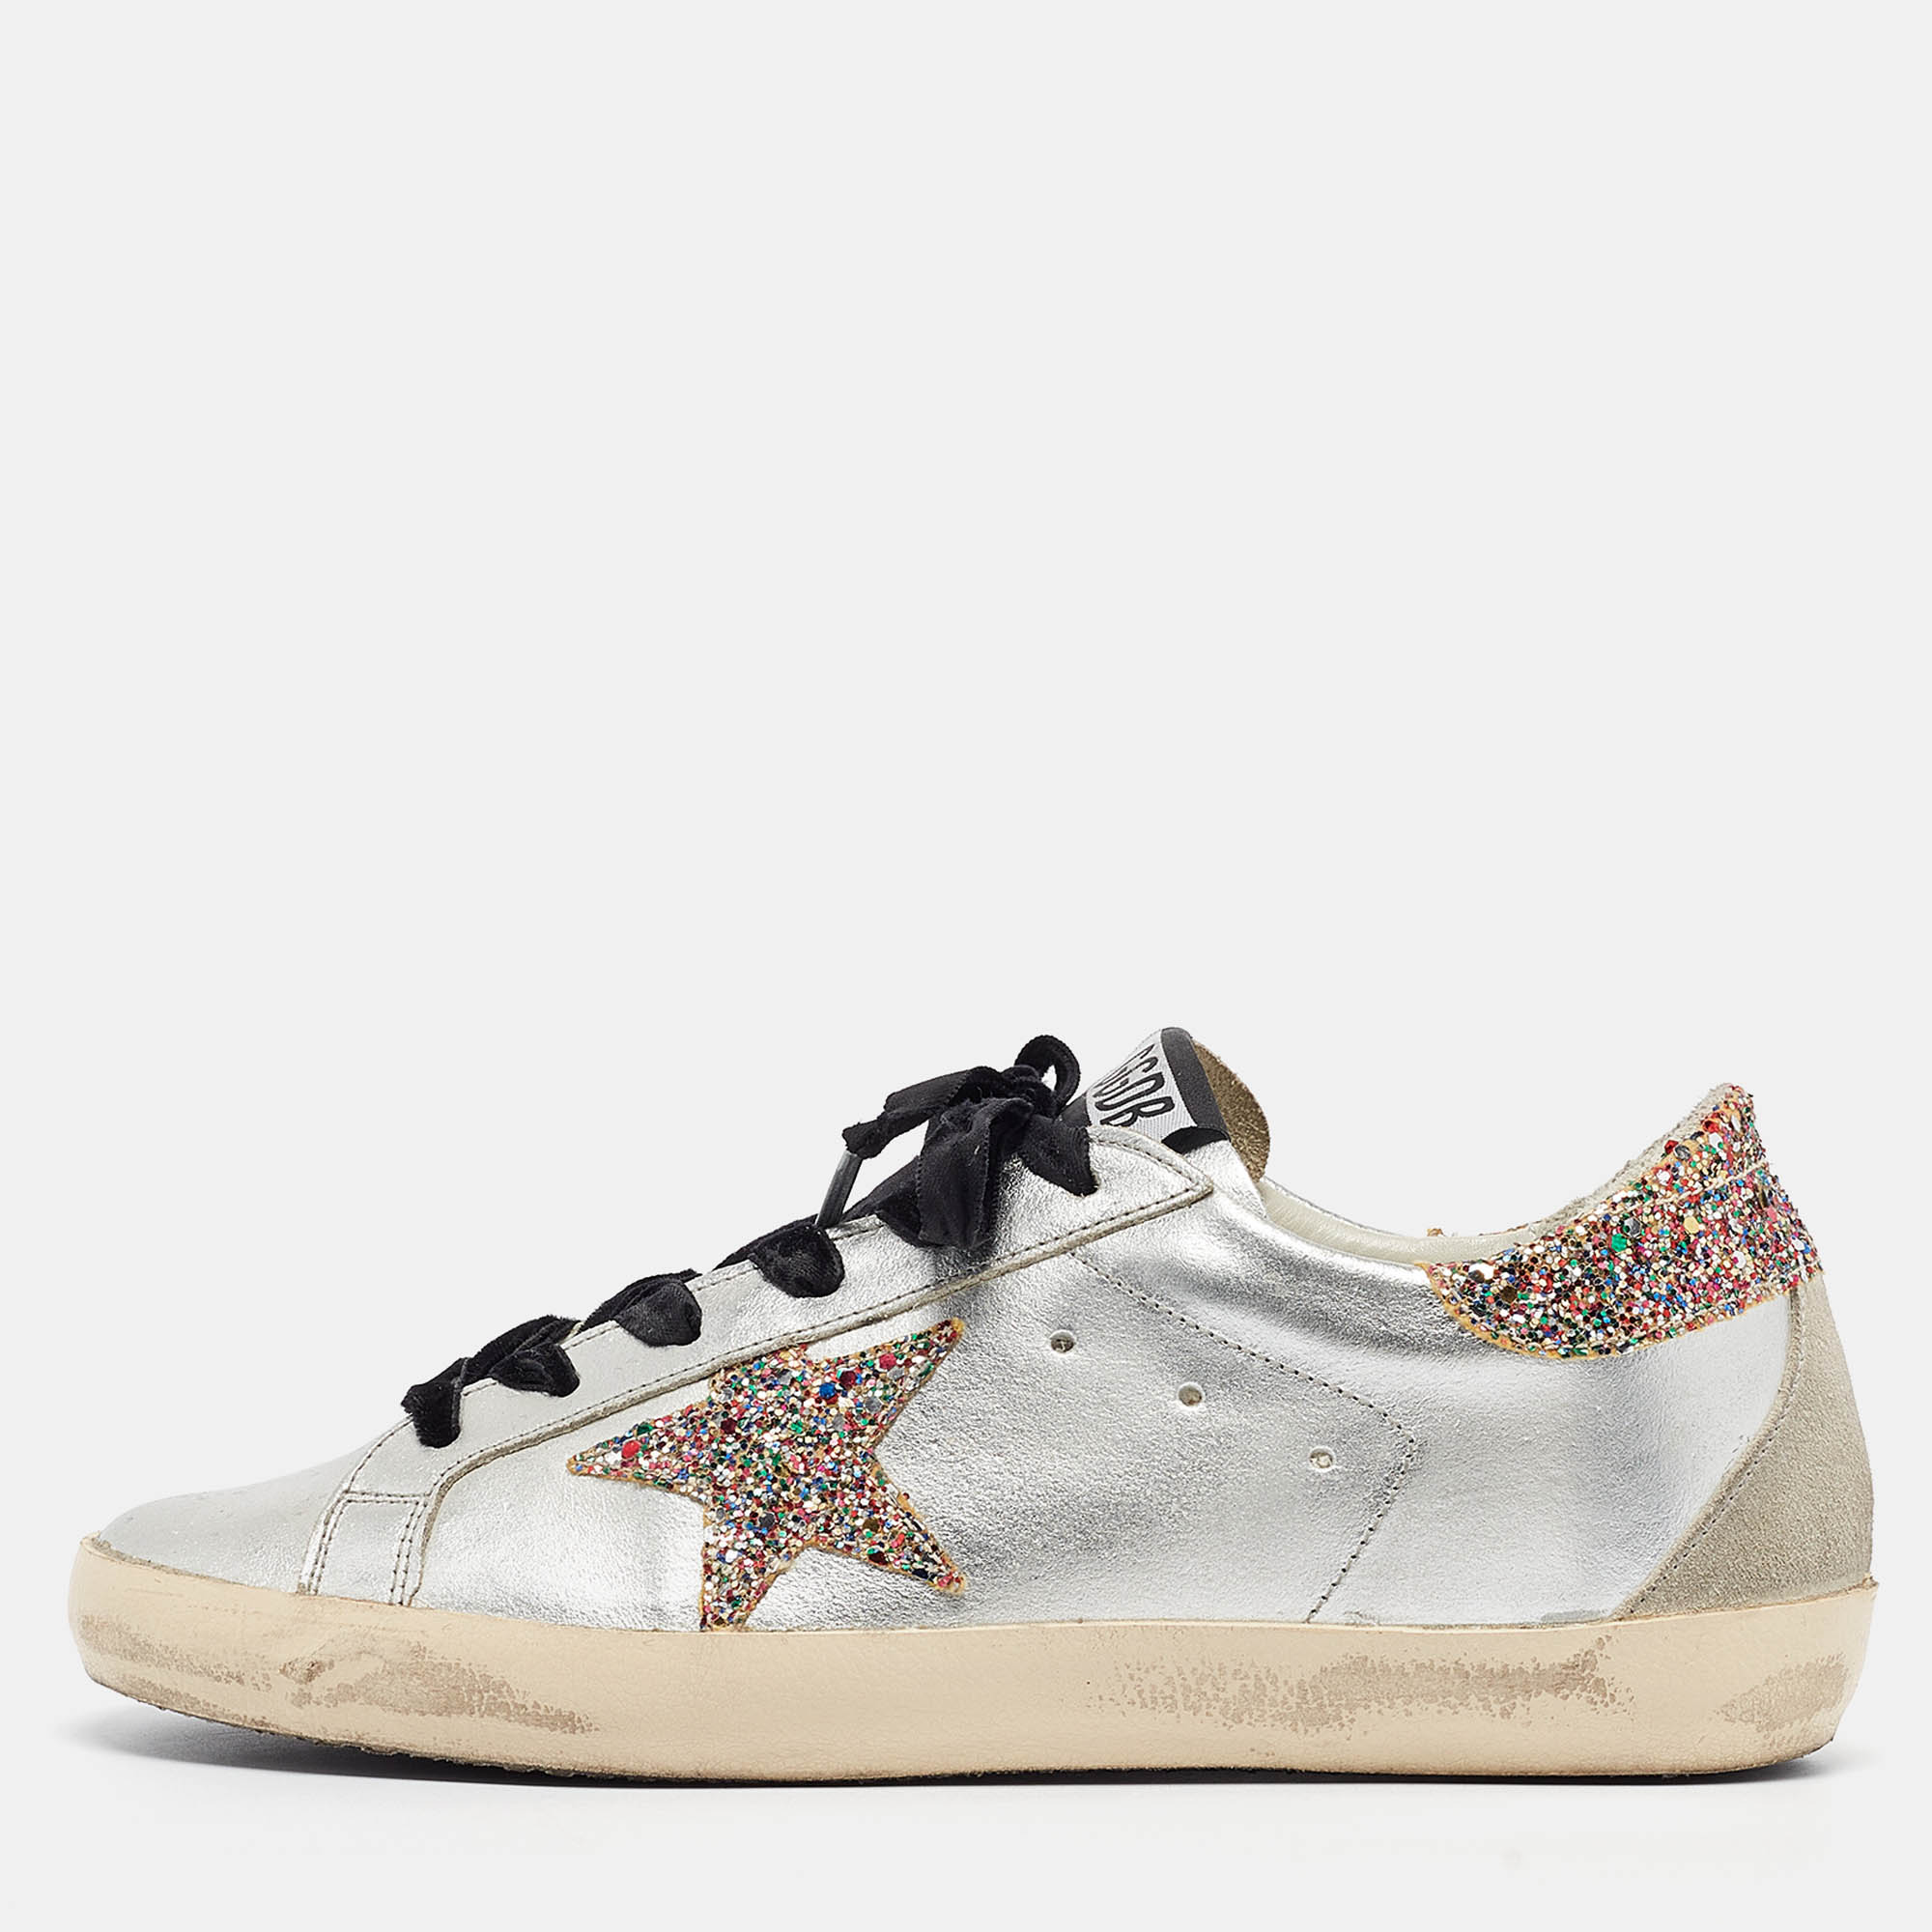 

Golden Goose Sliver Leather and Glitter Superstar Sneakers Size, Silver